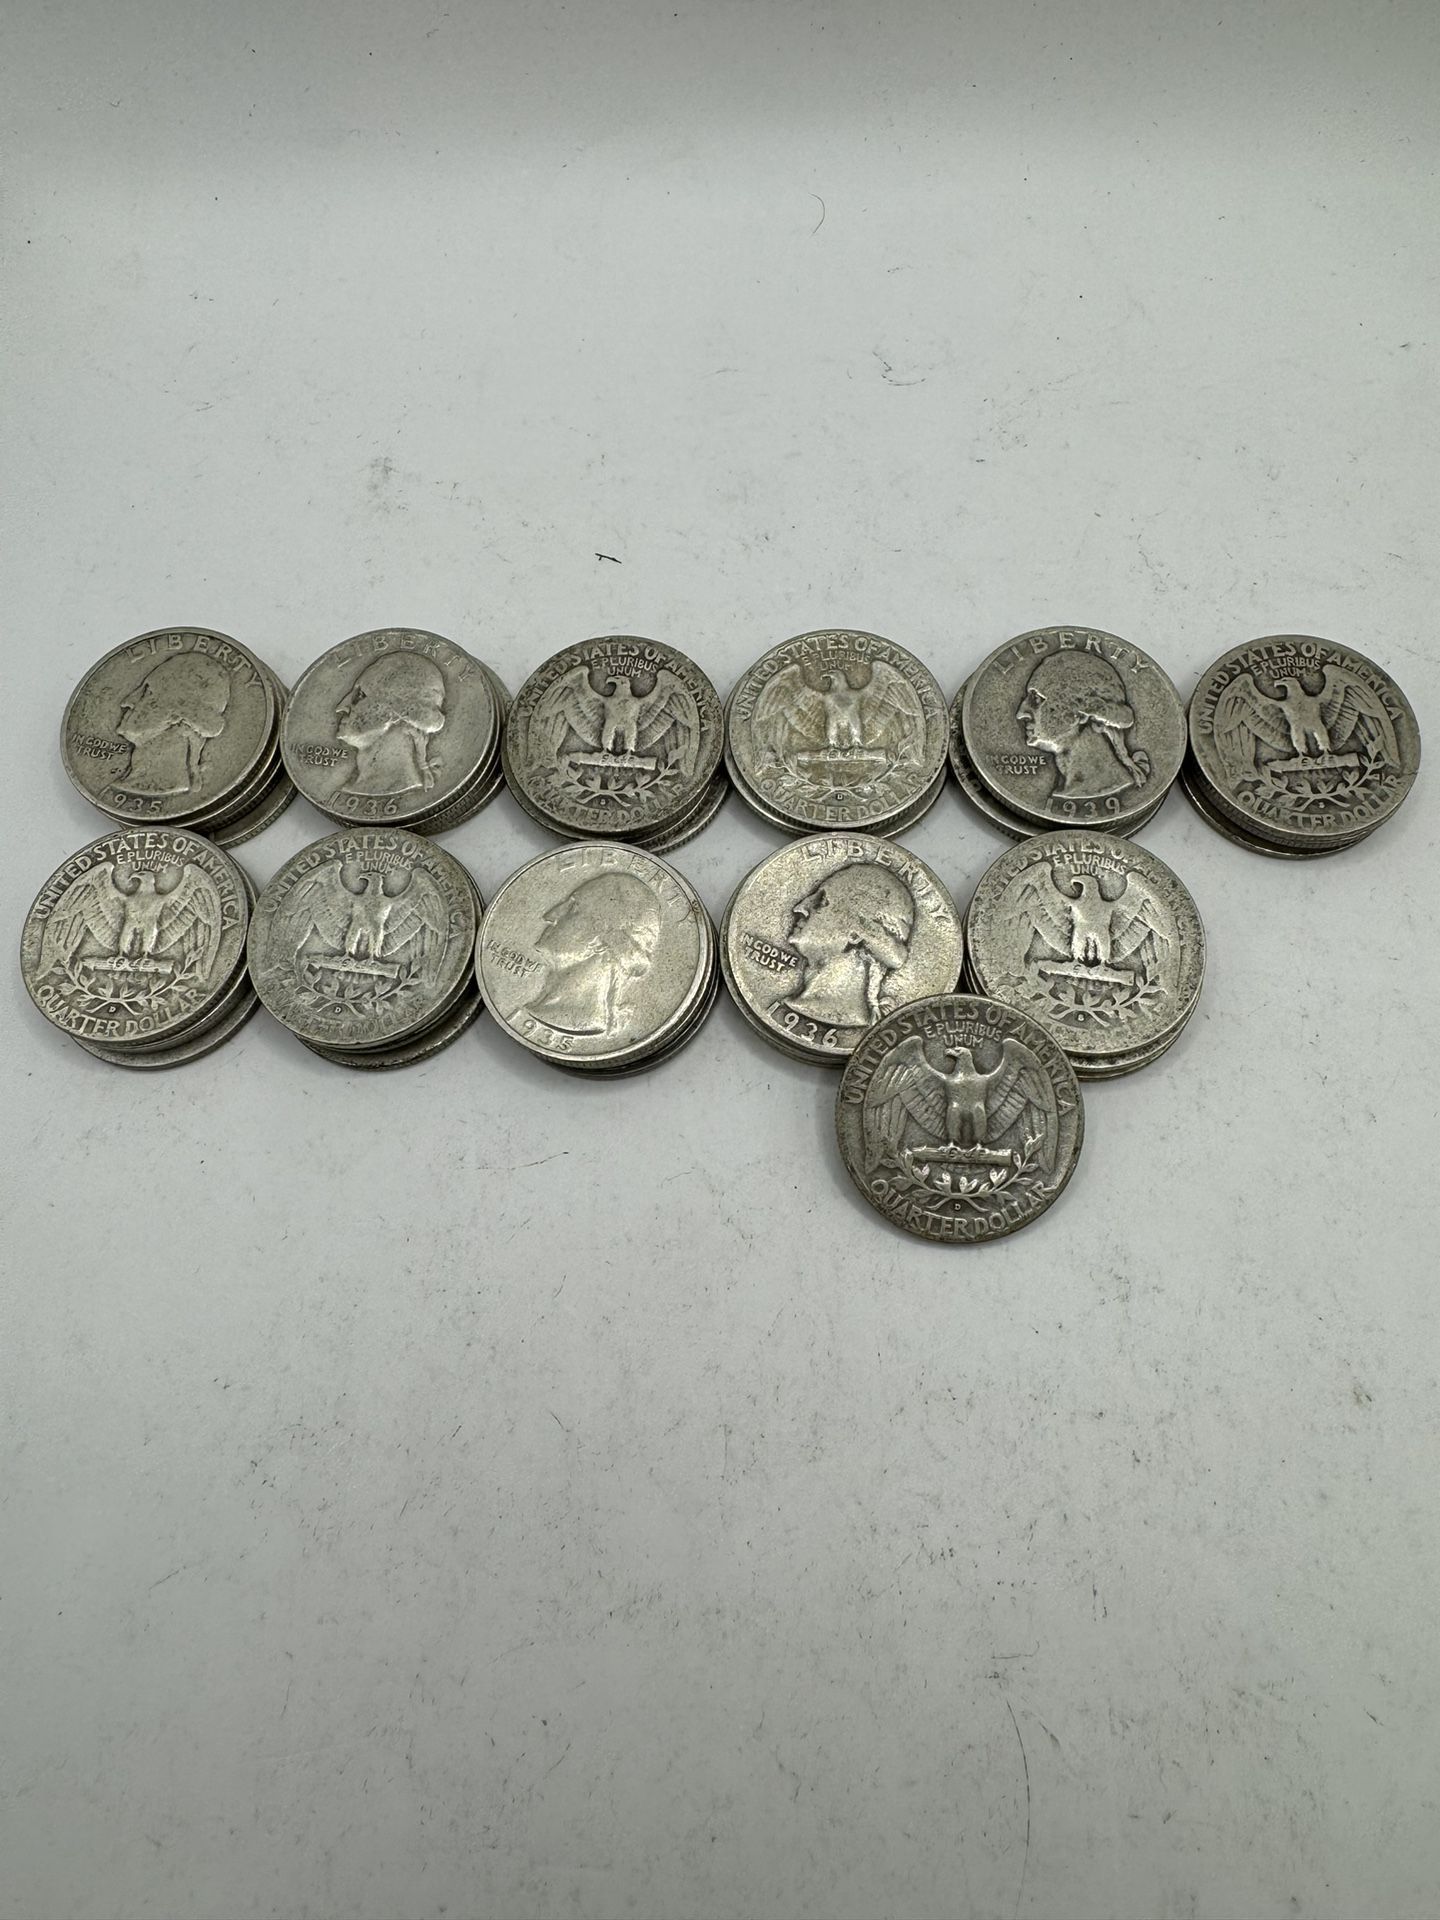 45 Semi-Key Date 90% Silver Washington Quarters Coins All From 1930s With Mint Marks!